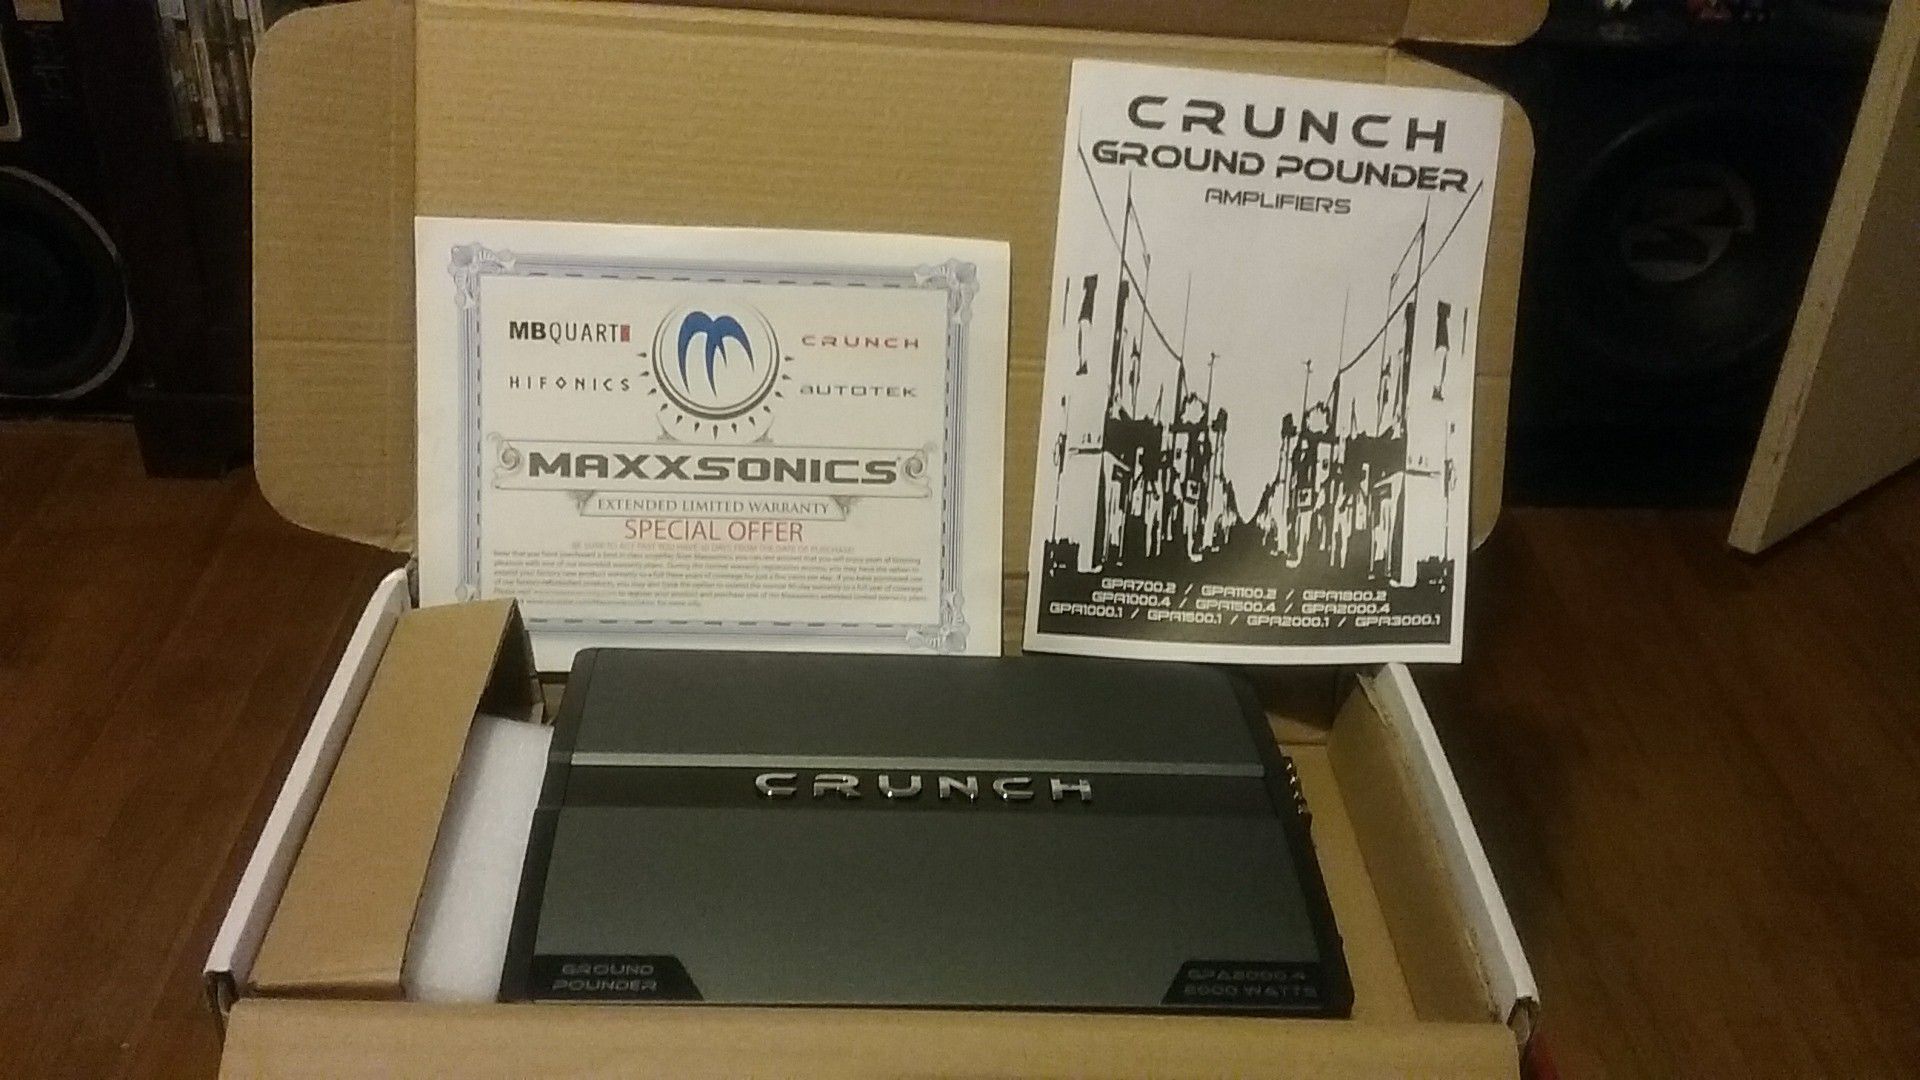 2000 watt Crunch Ground Pounder.This amp is brand new in box never used. This amp will push all your highs with no problem. You cant beat it for $80